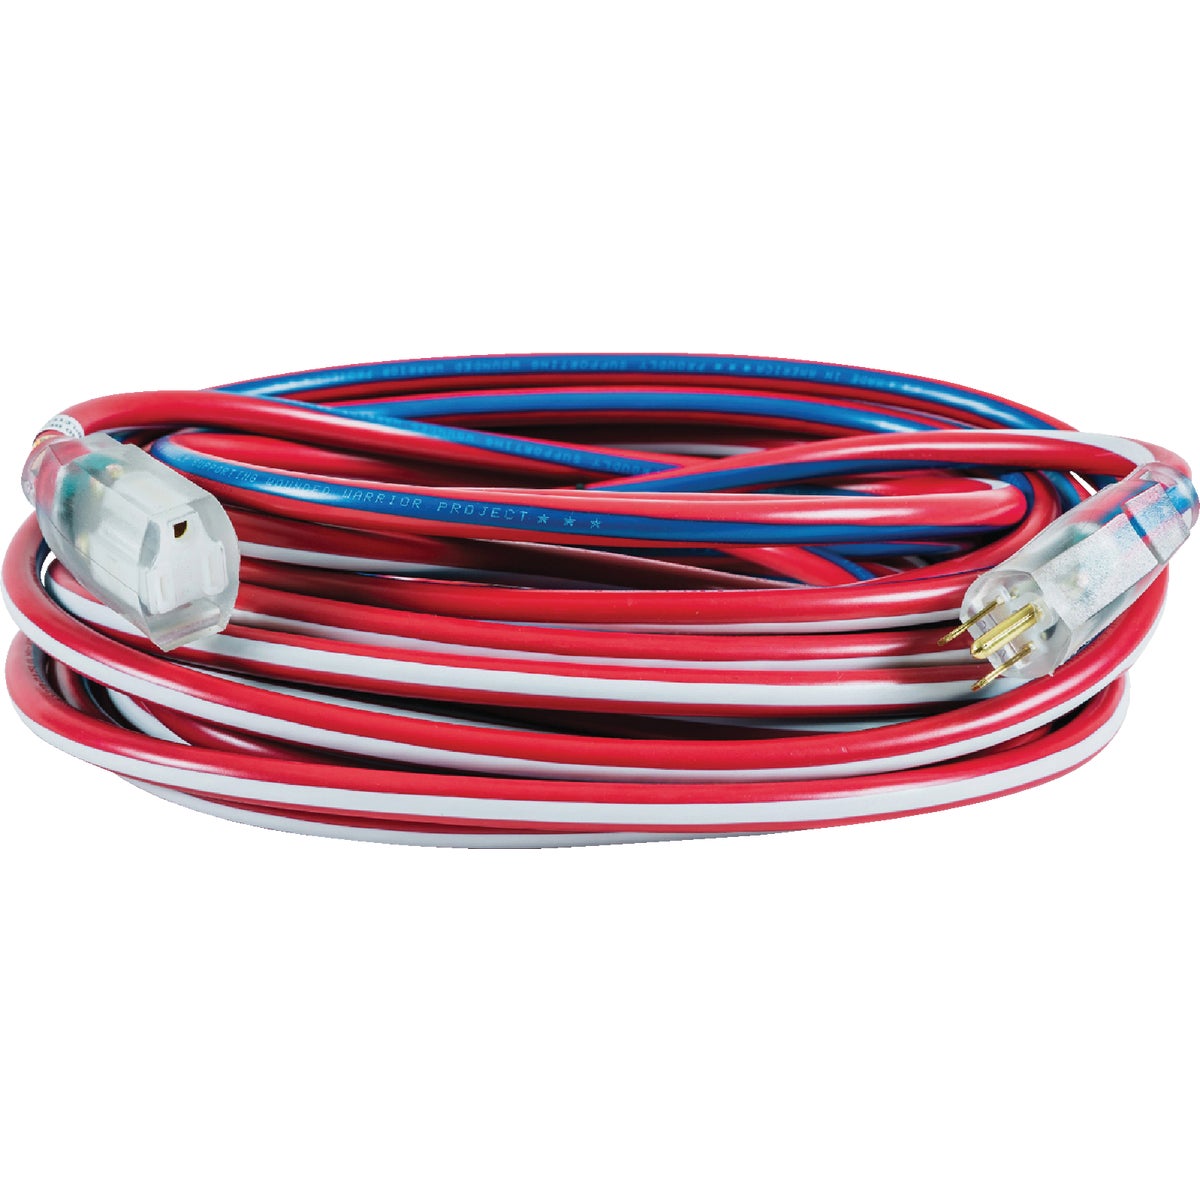 Southwire Wounded Warrior Project 100 Ft. 12/3 Indoor/Outdoor Red, White, & Blue Striped Patriotic Extension Cord